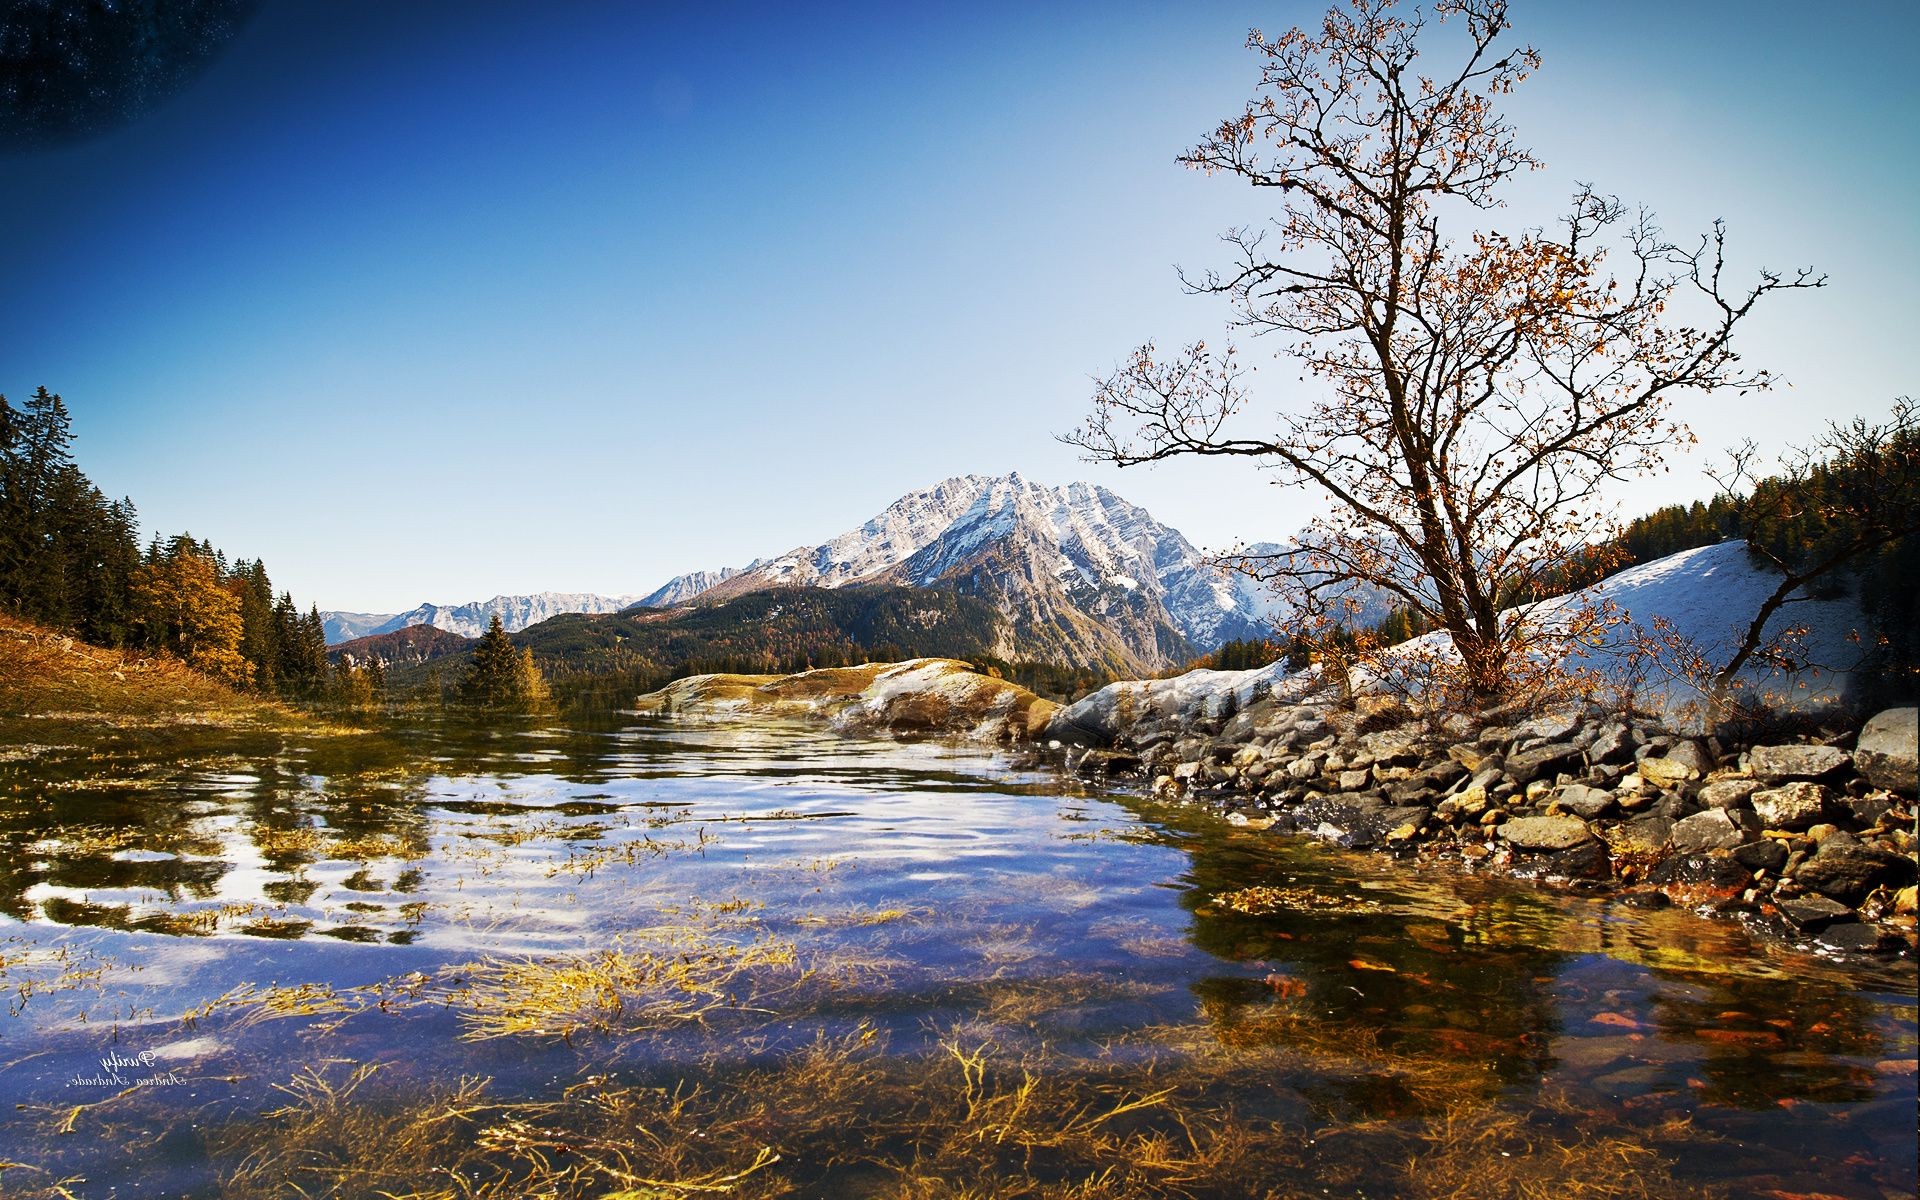 mountains landscape water nature lake reflection tree snow sky mountain river fall wood scenic travel outdoors